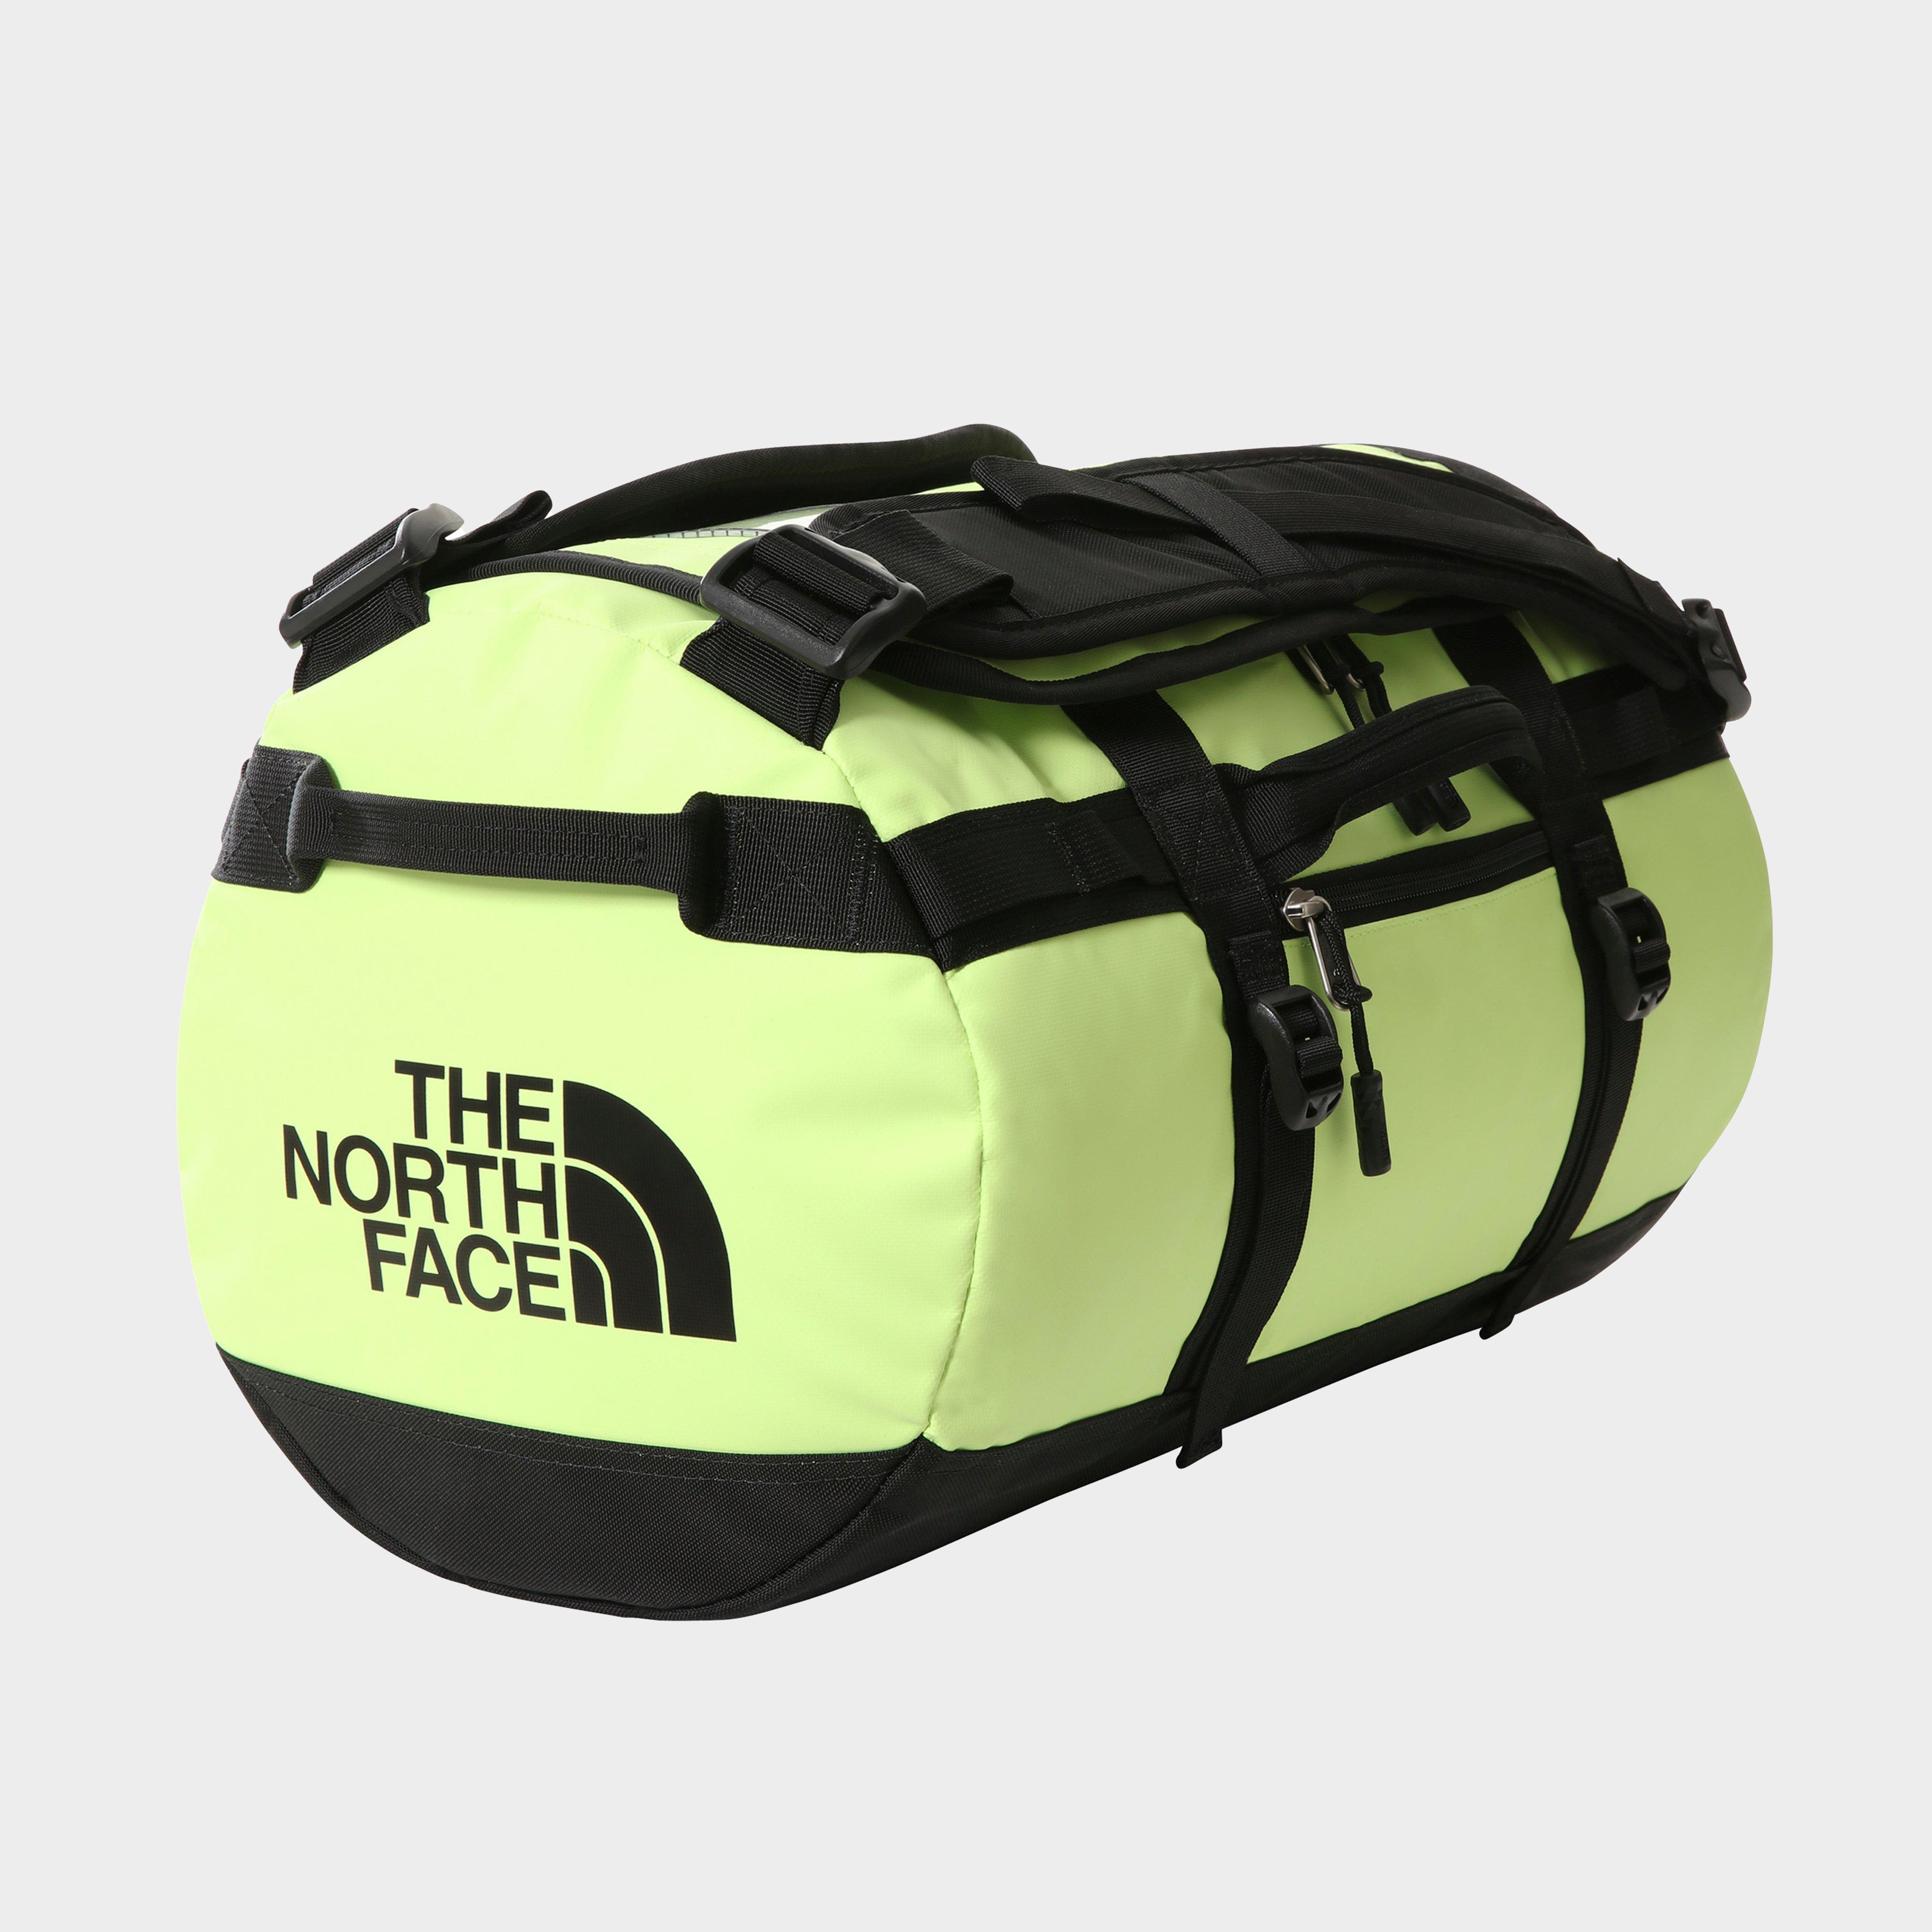 The North Face Basecamp Duffel Bag (extra Small) - Green/black  Green/black